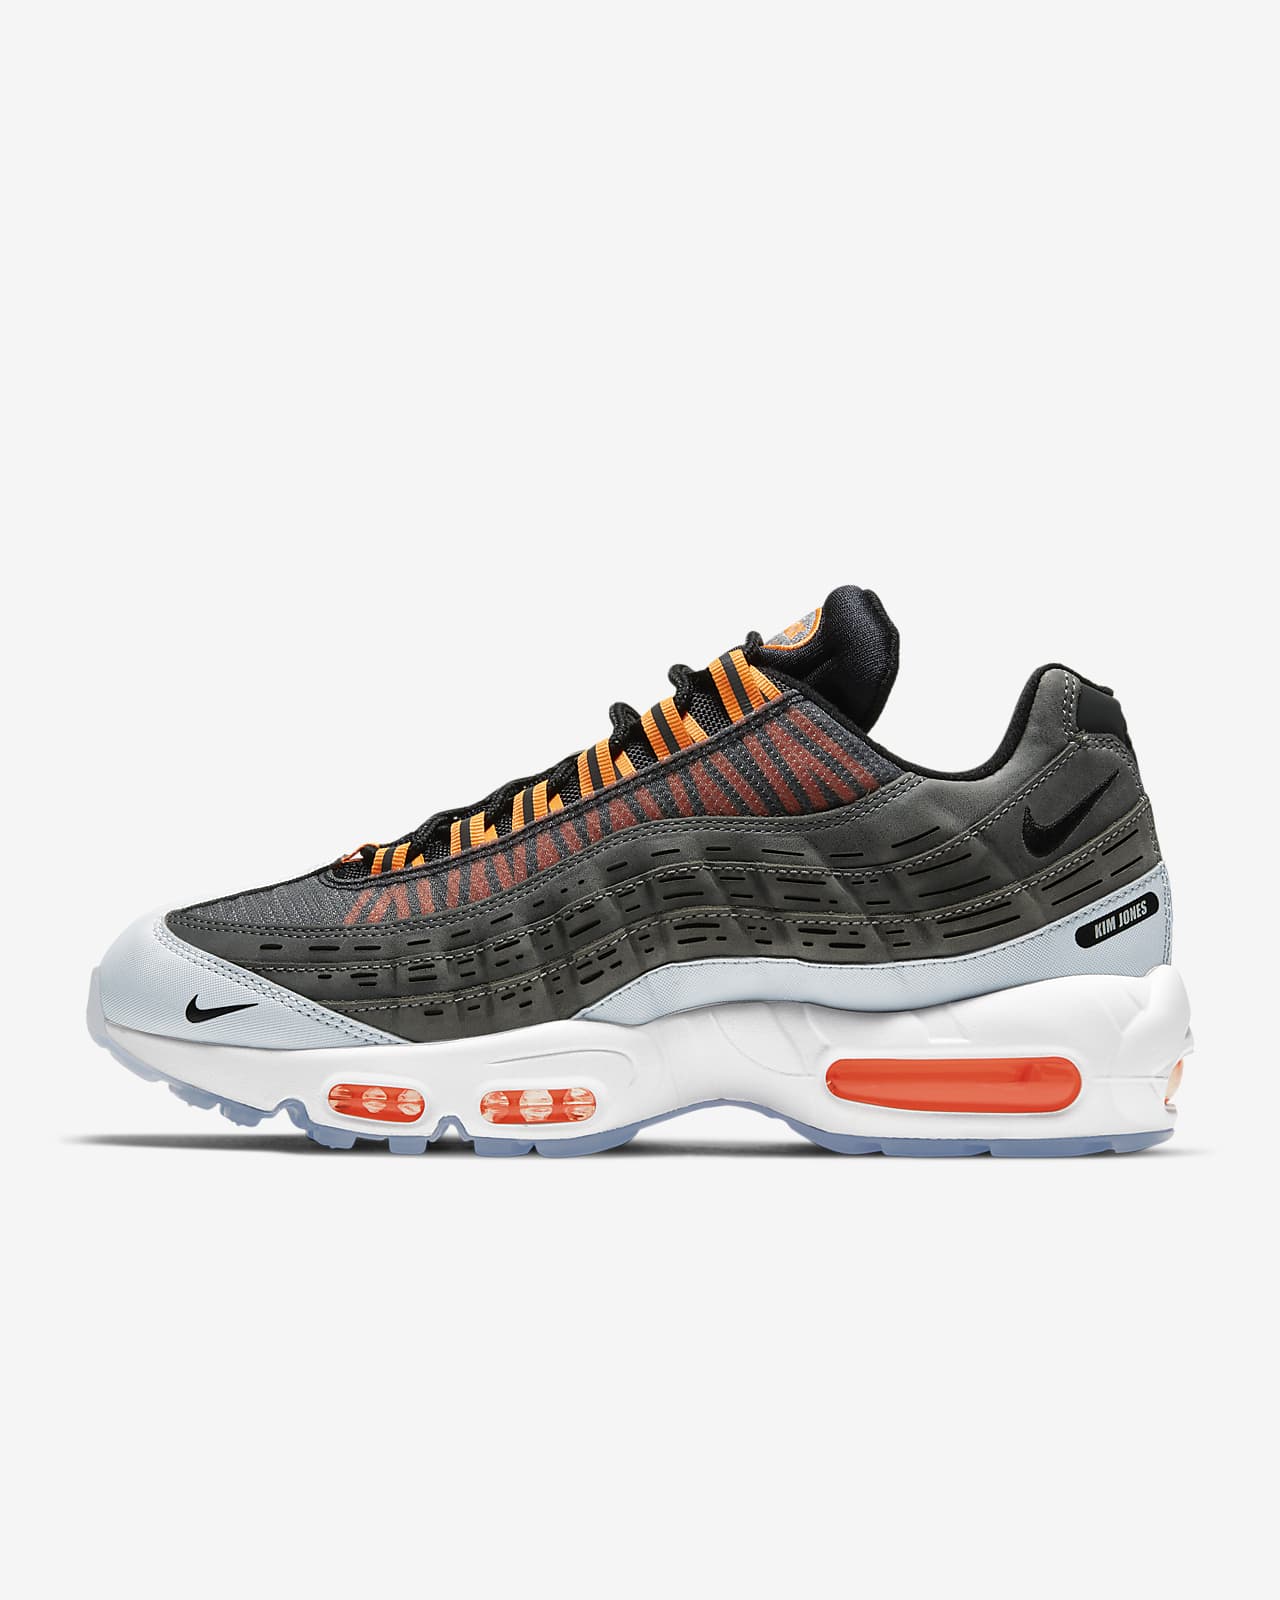 air max 95 offers